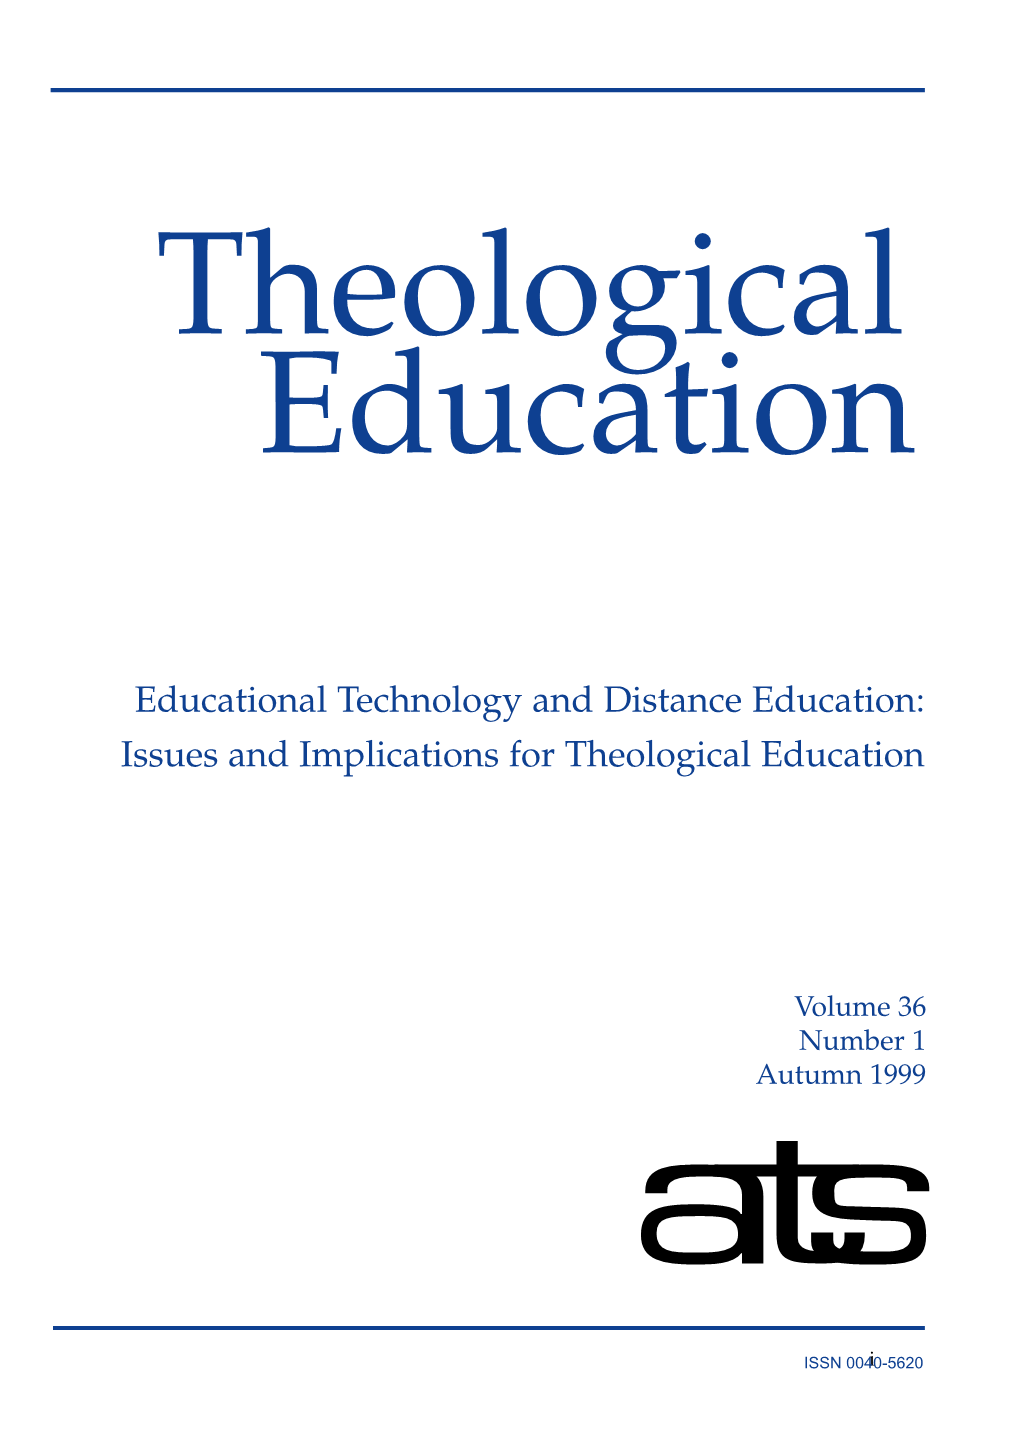 Educational Technology and Distance Education: Issues and Implications for Theological Education